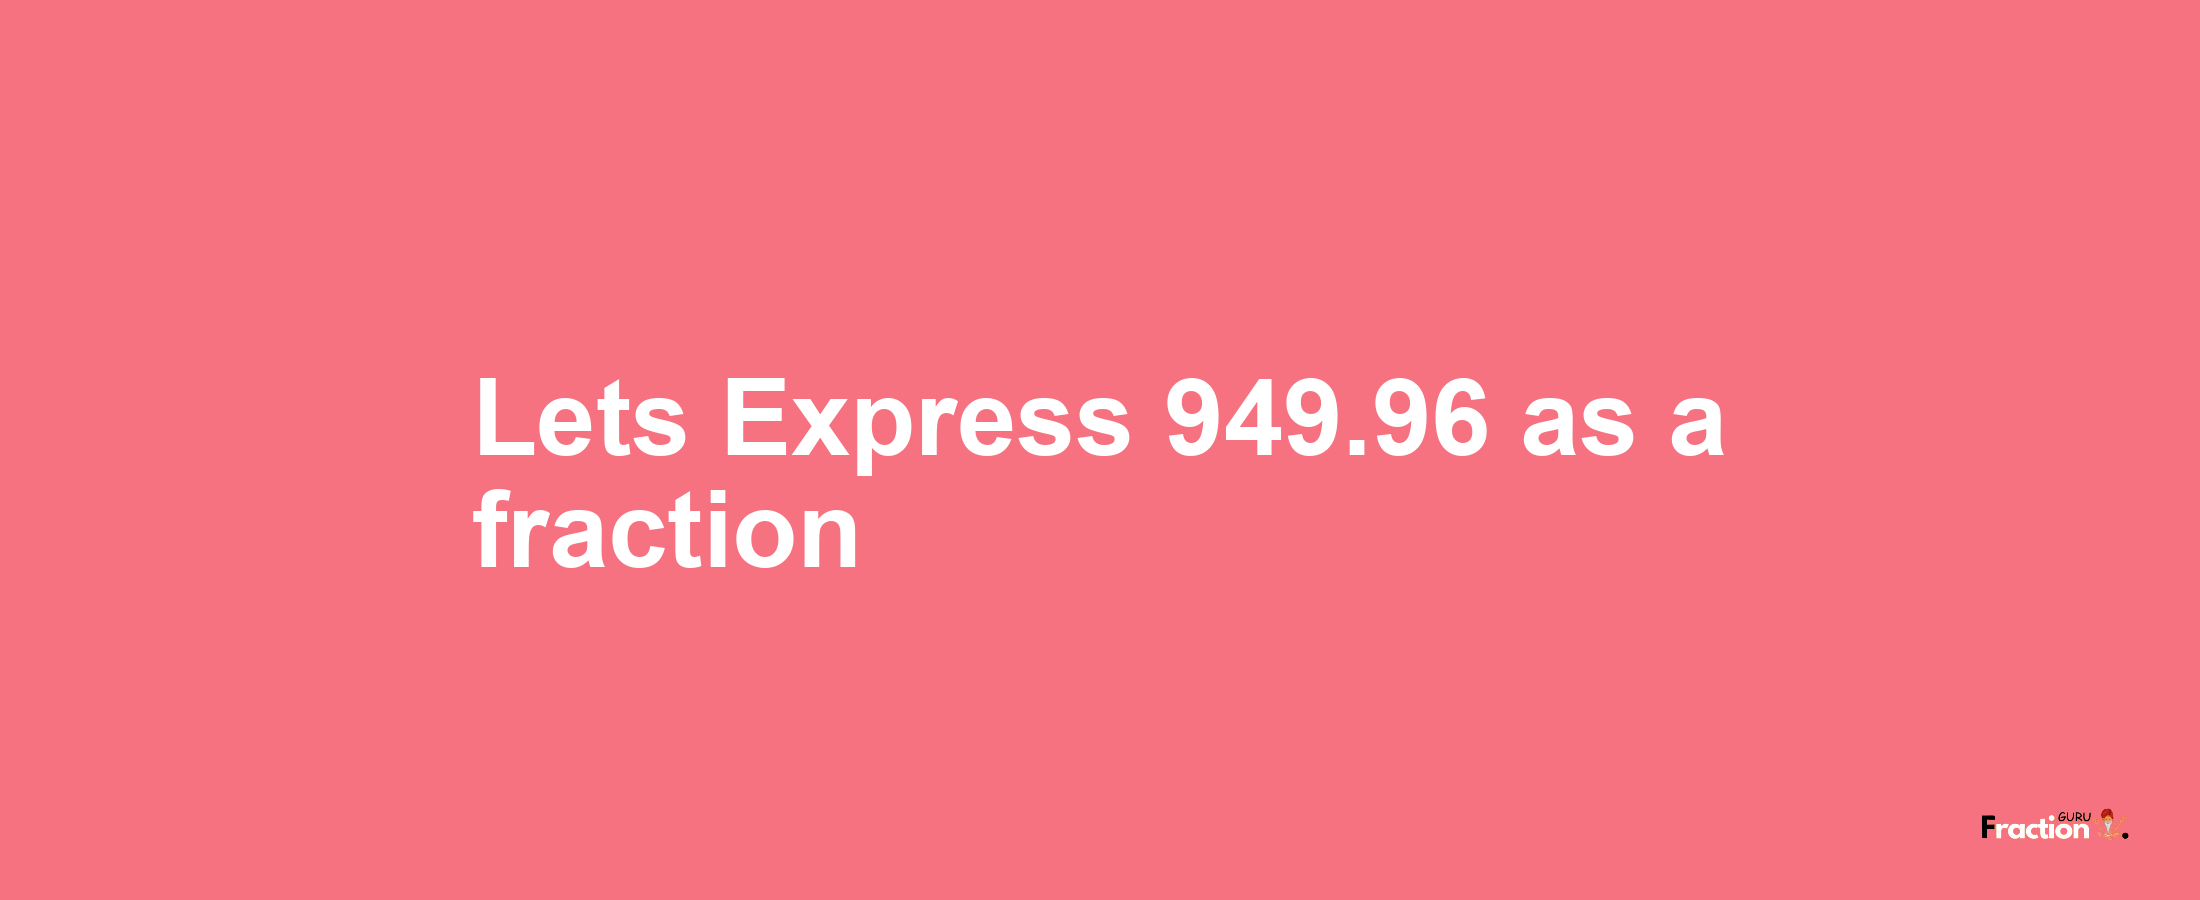 Lets Express 949.96 as afraction